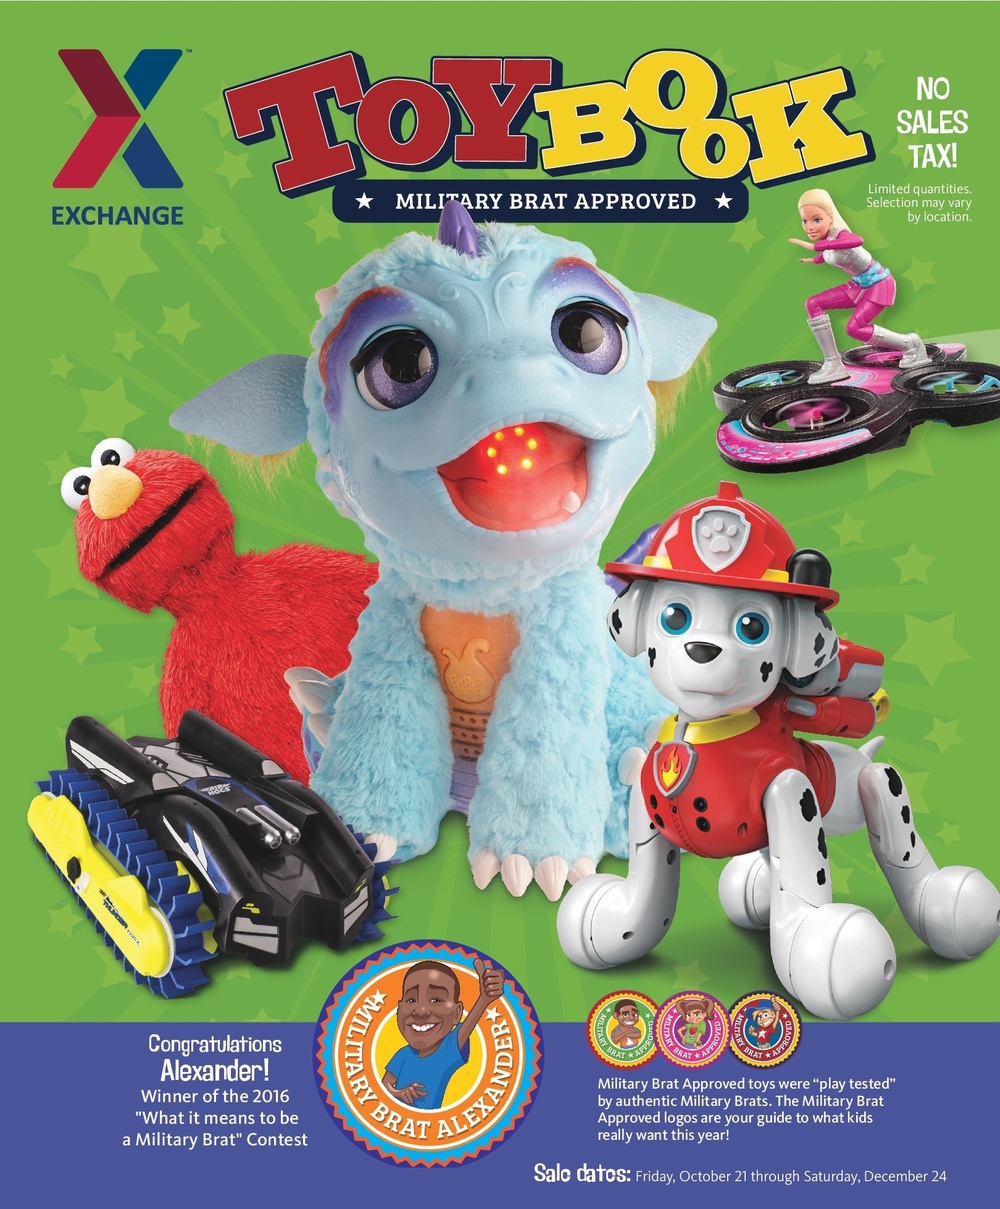 Exchange Announces 2016 Toyland Toy Book Featuring ‘Military Brat-Approved’ Toys